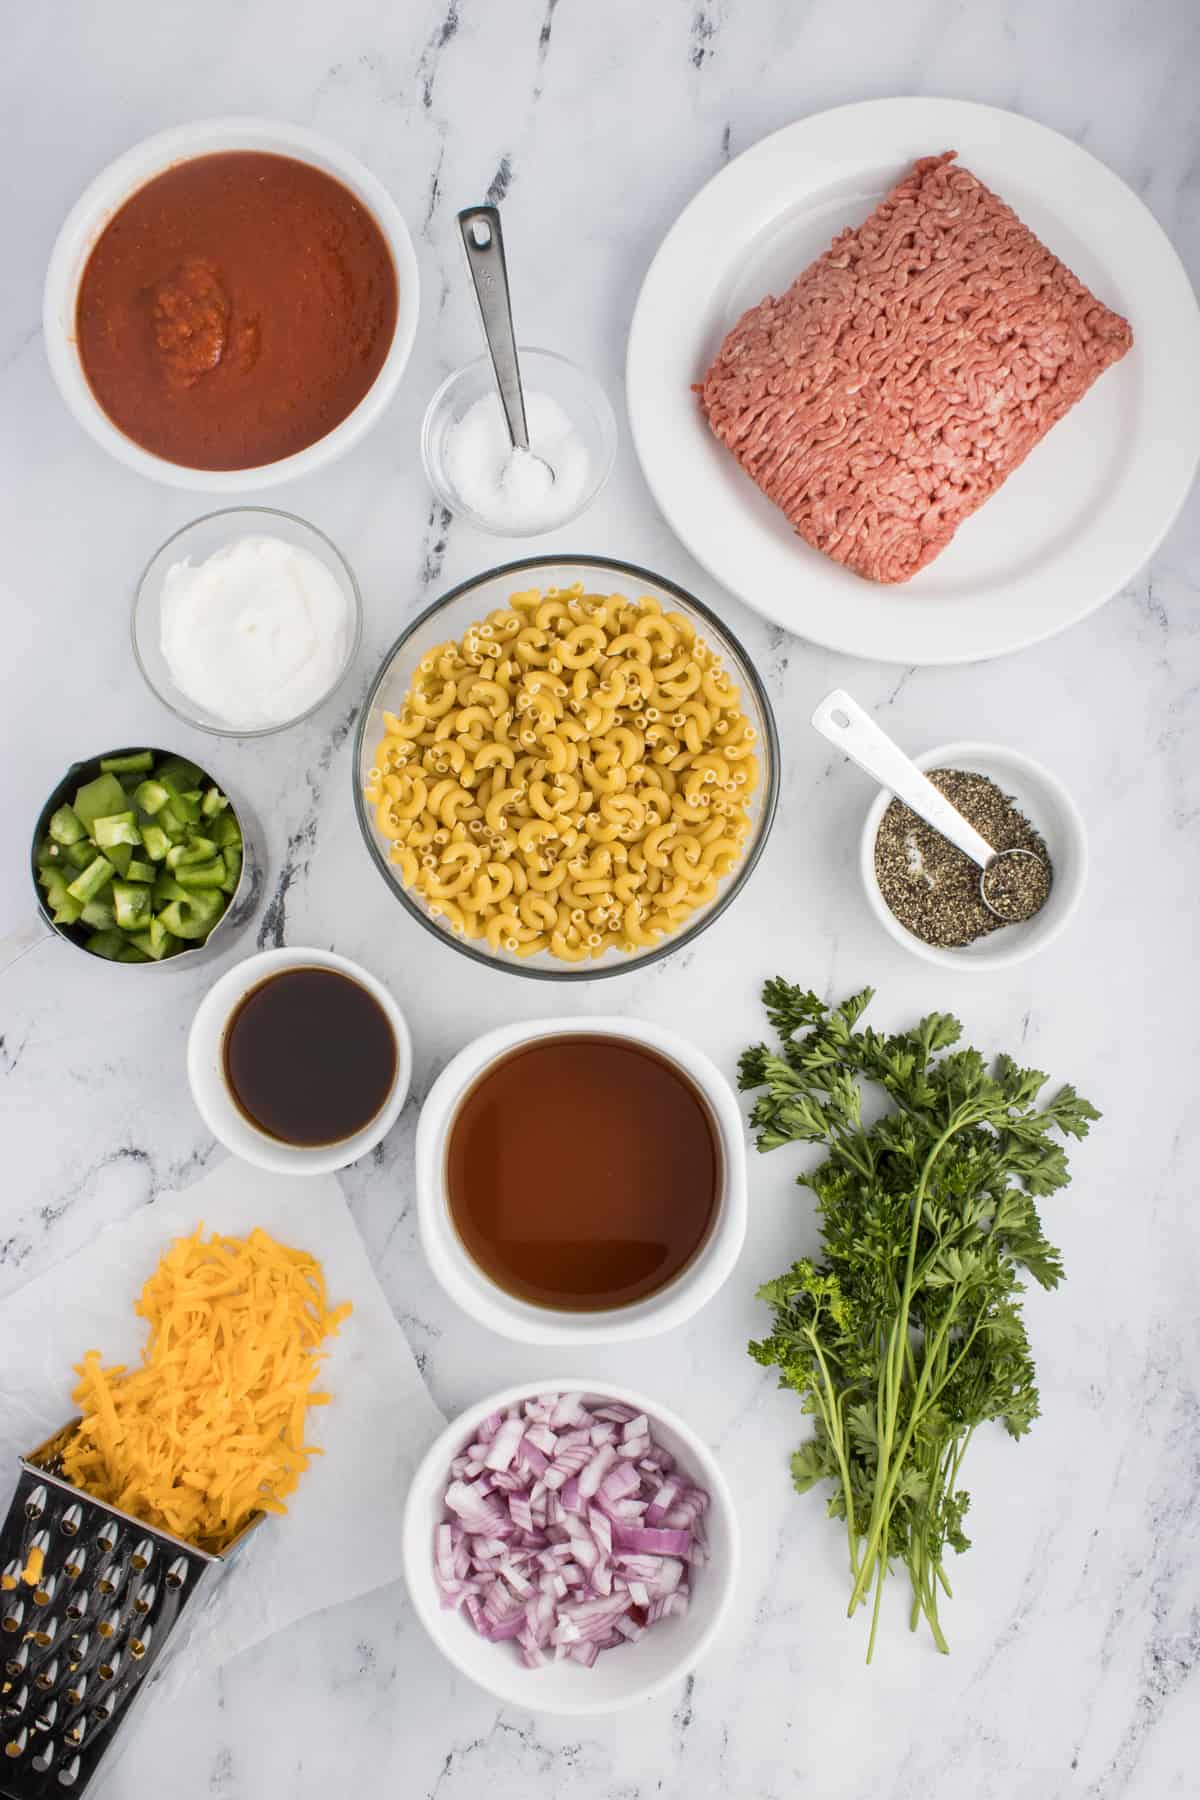 This ingredient shot specifically focuses on the key ingredients needed for the Cheesy Hamburger Casserole